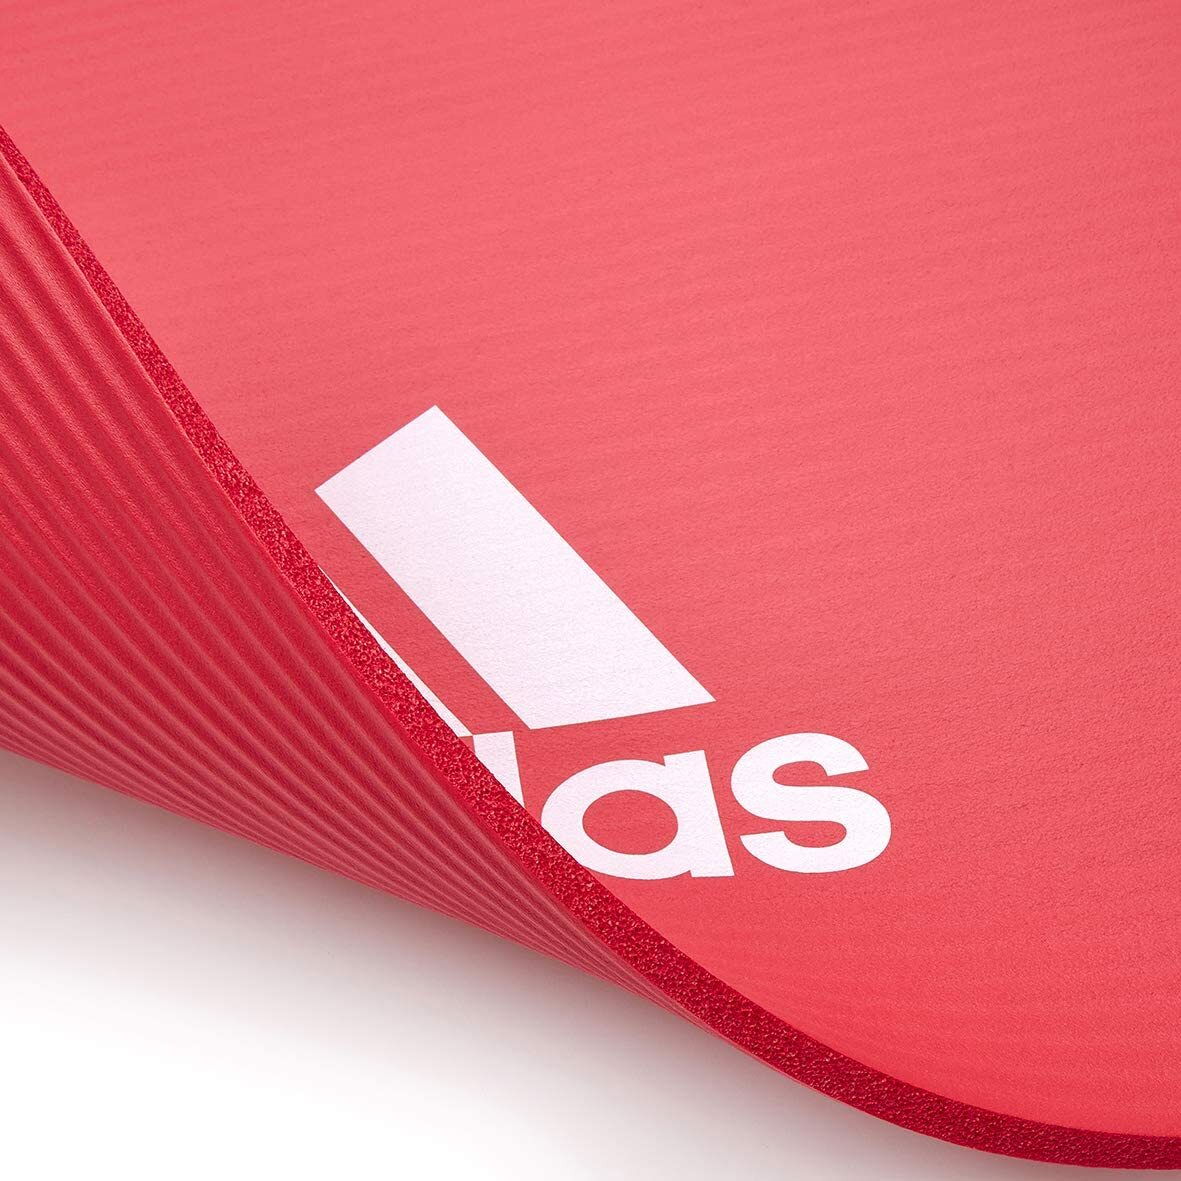 Buy Adidas 7mm Thickness Yoga Mat - Red, Exercise and yoga mats